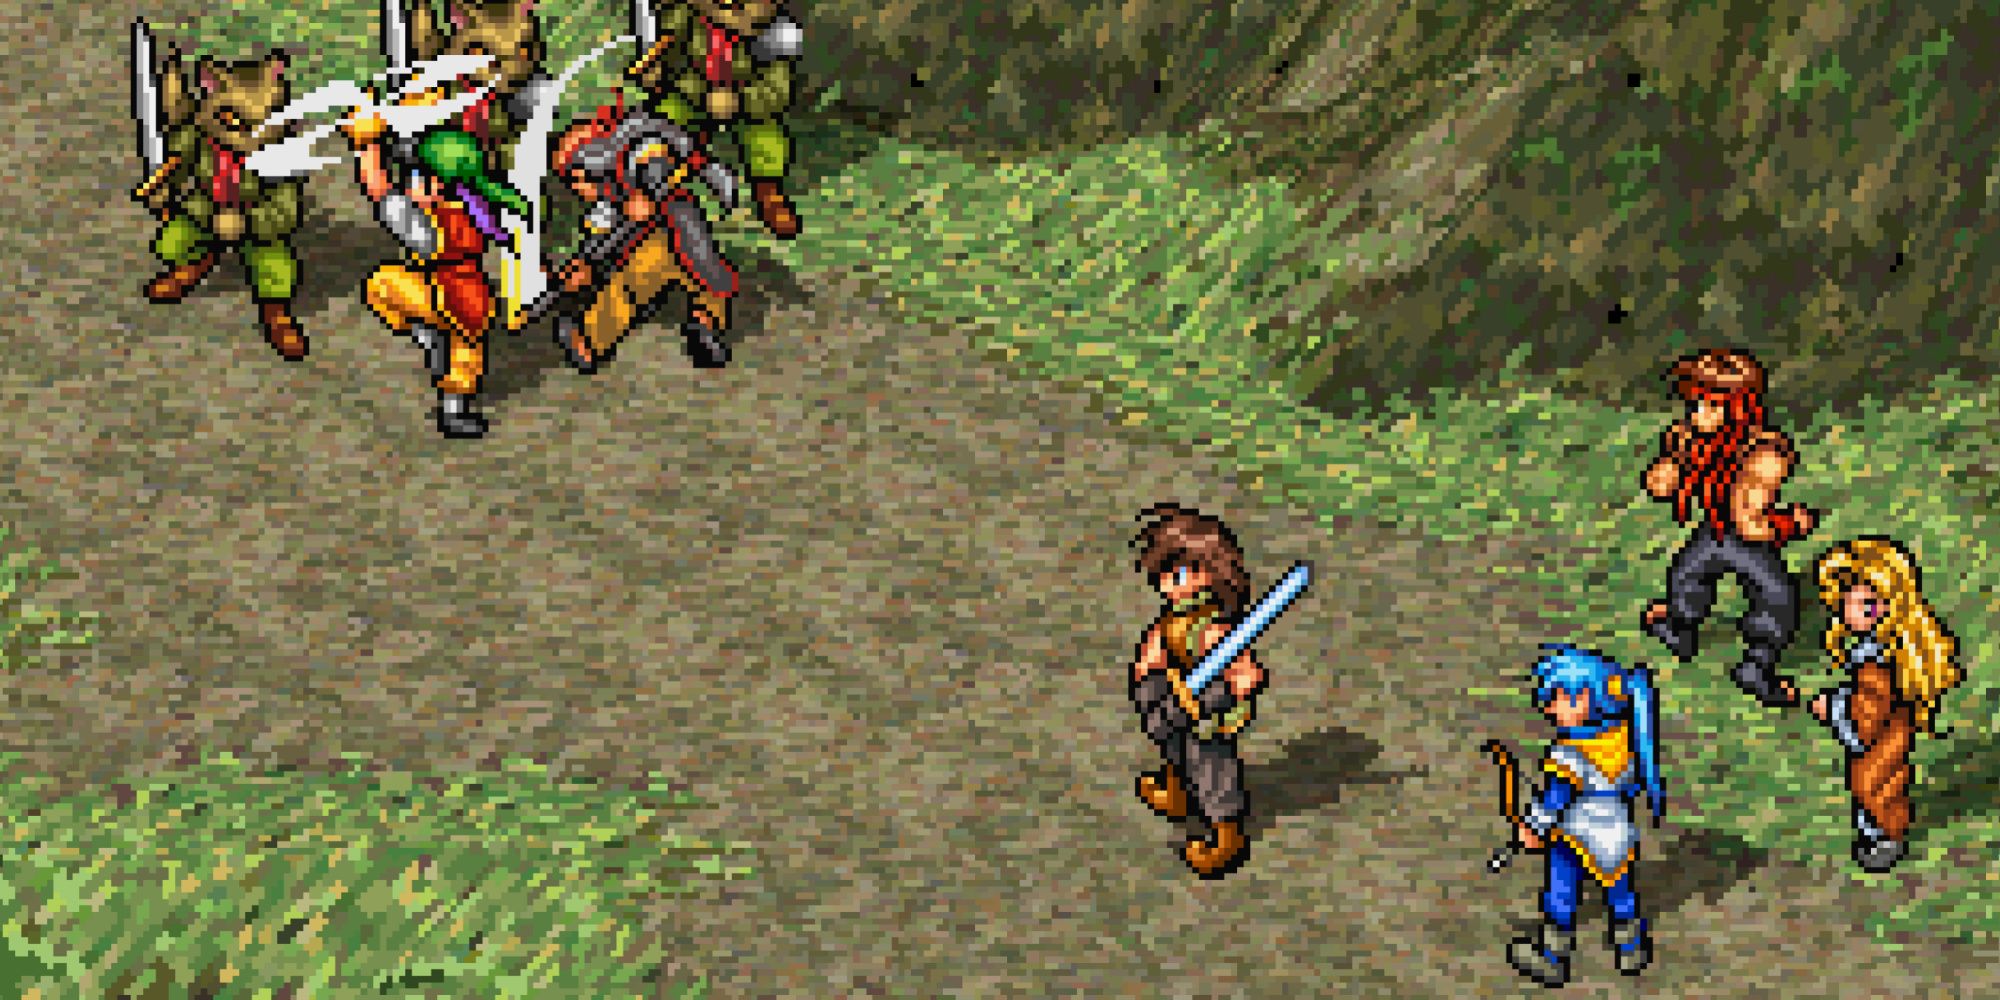 Fighting a battle in Suikoden 1